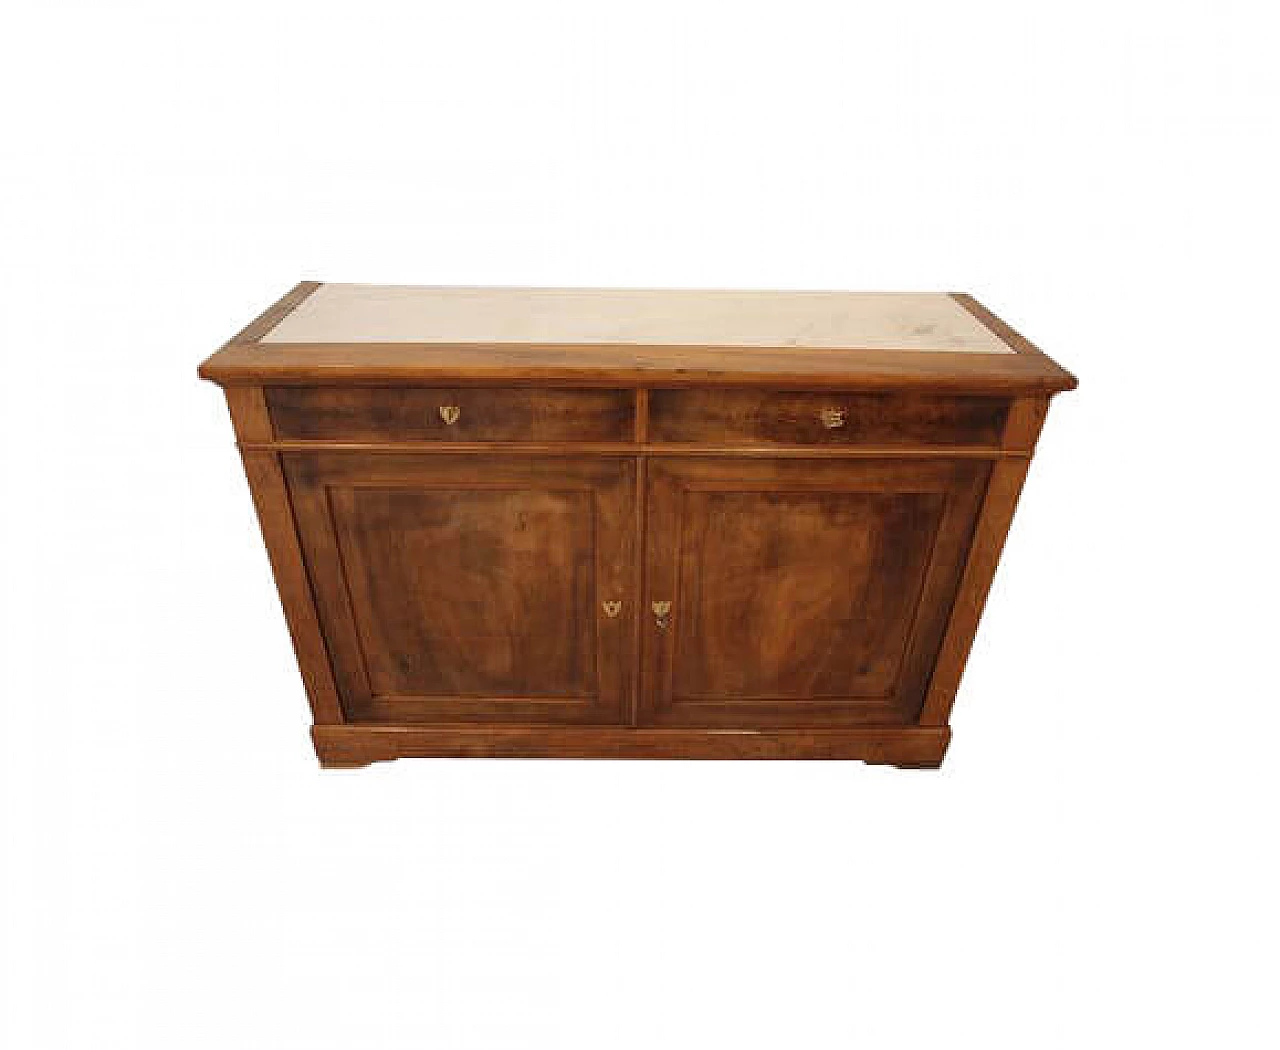 Low walnut sideboard with recessed marble top, 19th century 1143210